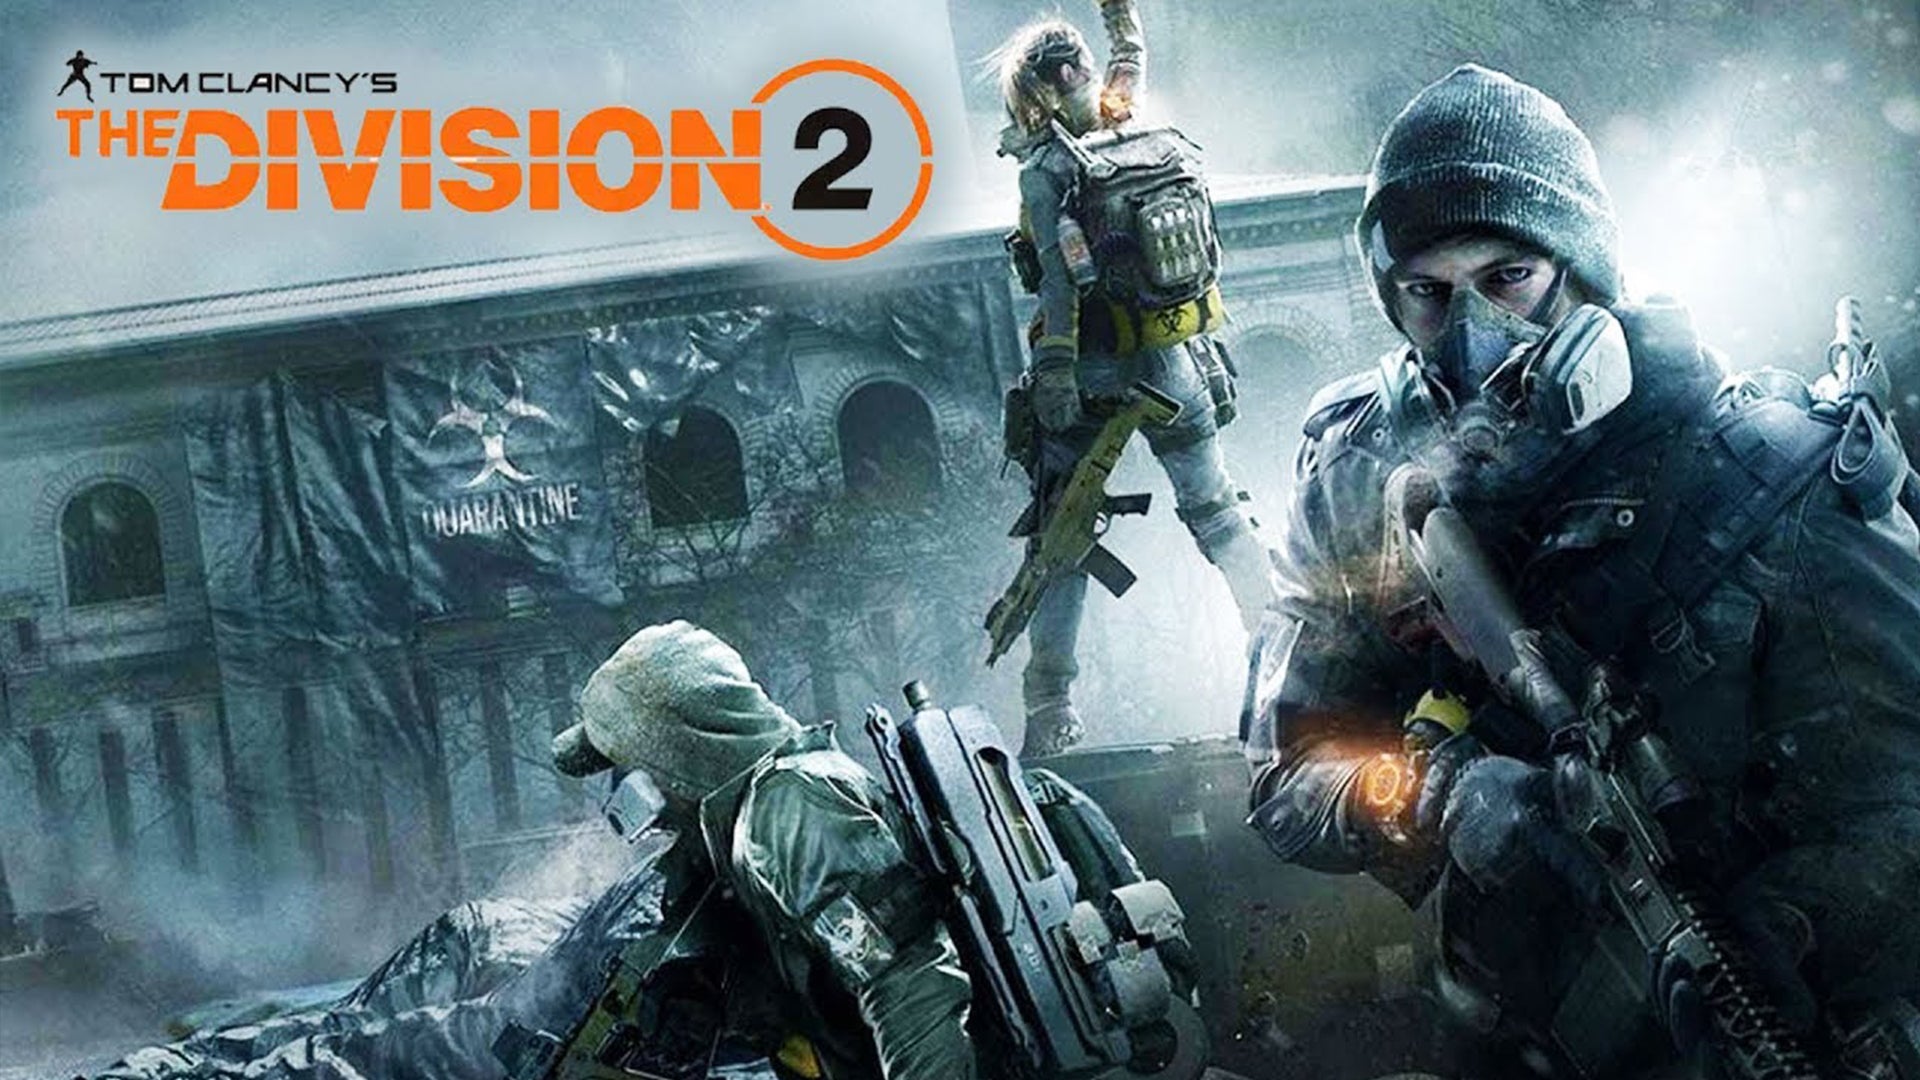 Image for The Division 2 Xbox One X/PC Private Beta First Look! - A Flagship Showing for the Snowdrop Engine?